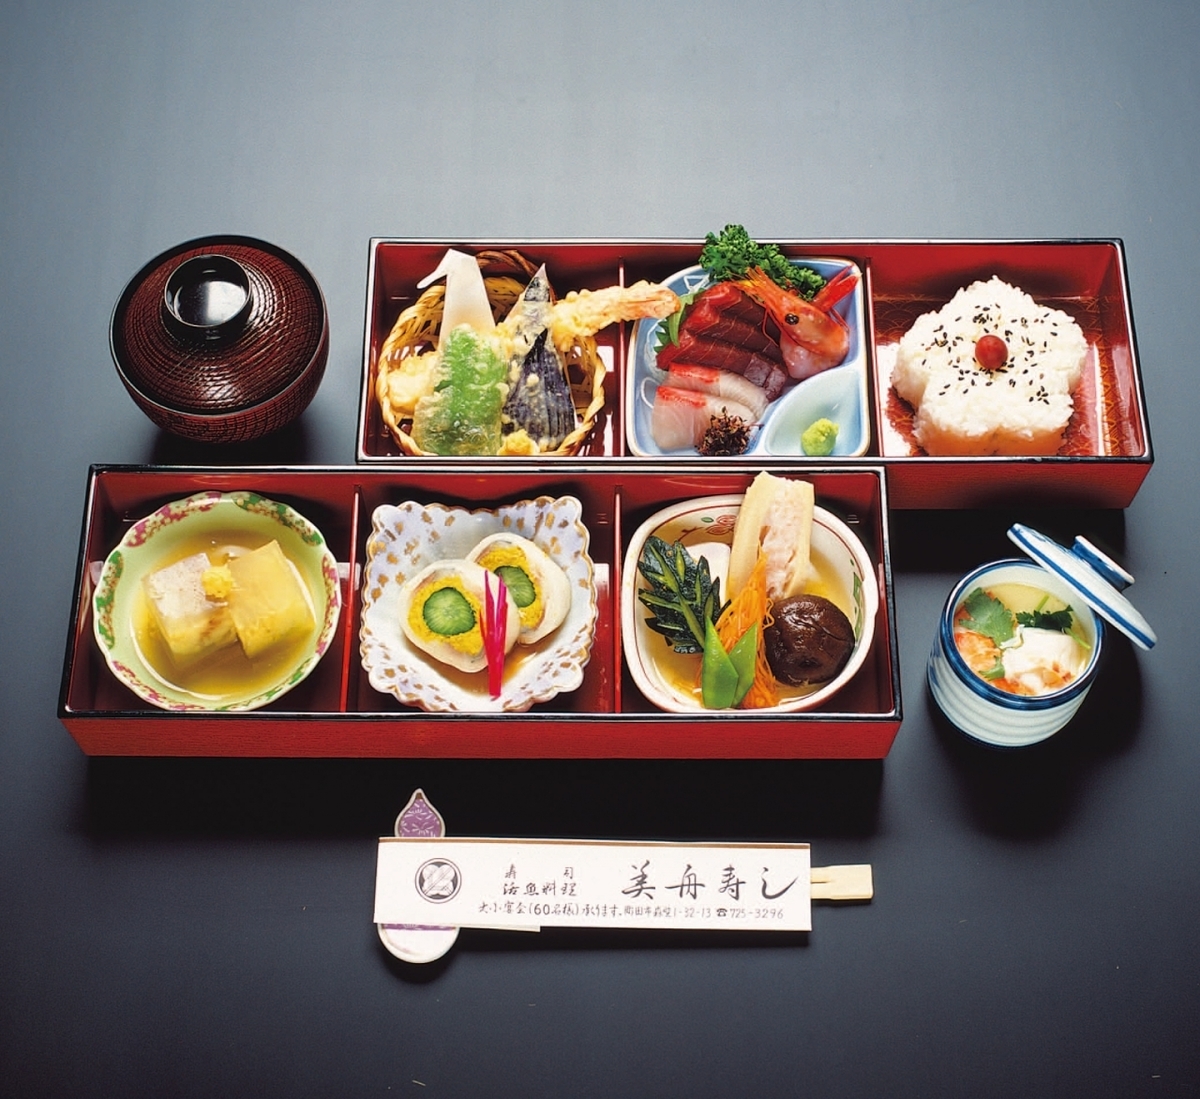 【Miyari catering service with good looks loved in Machida for a long time】